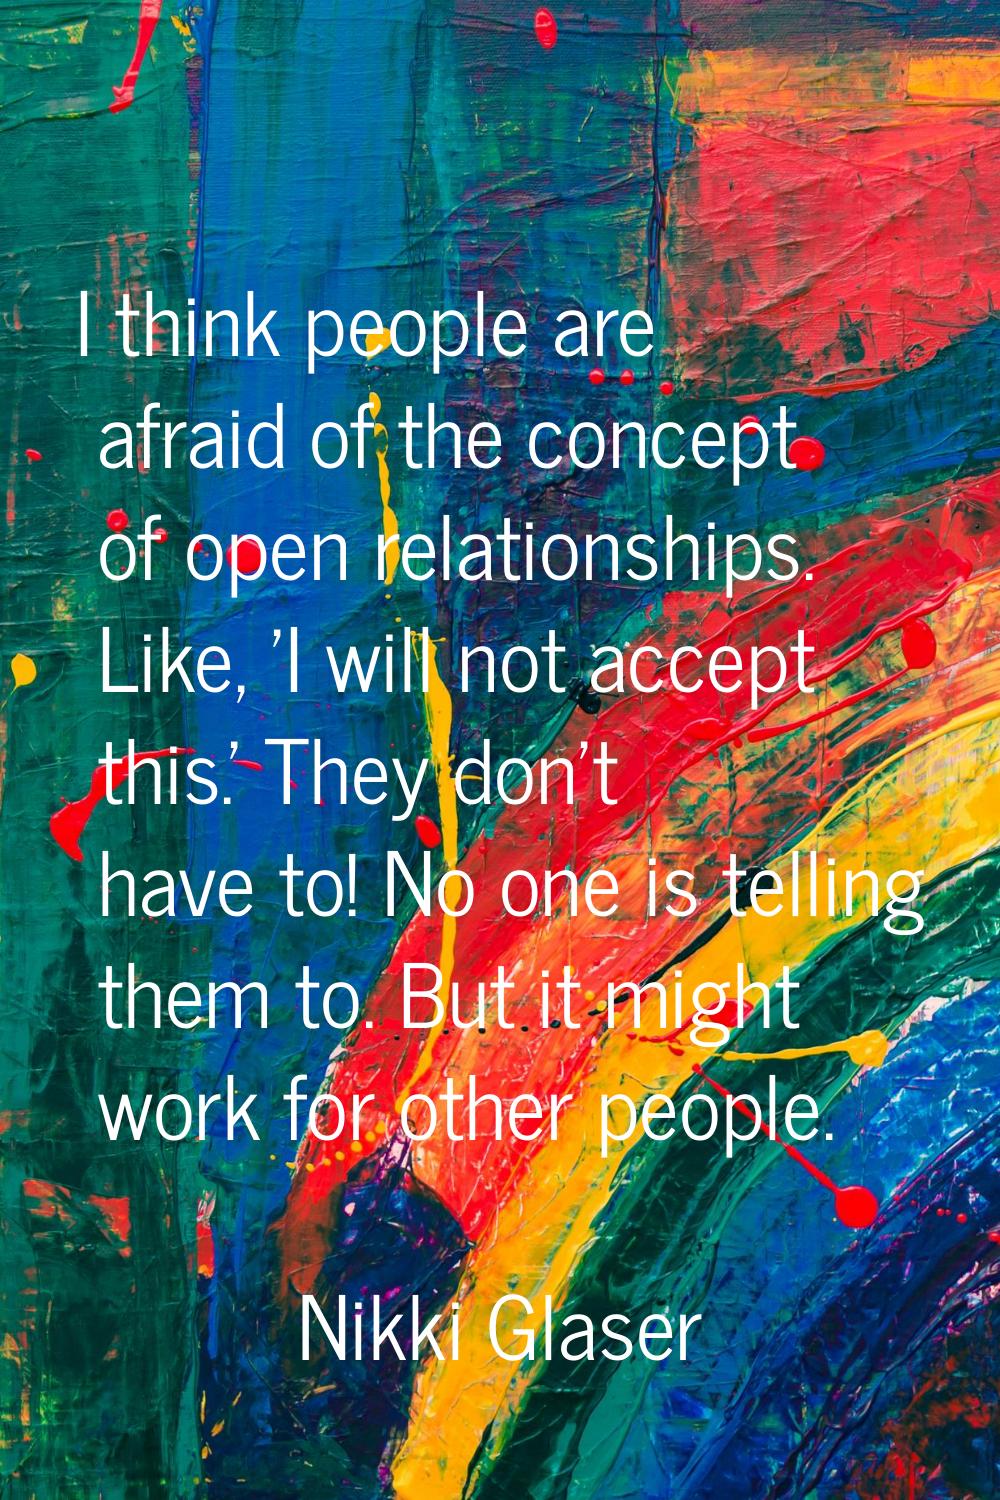 I think people are afraid of the concept of open relationships. Like, 'I will not accept this.' The